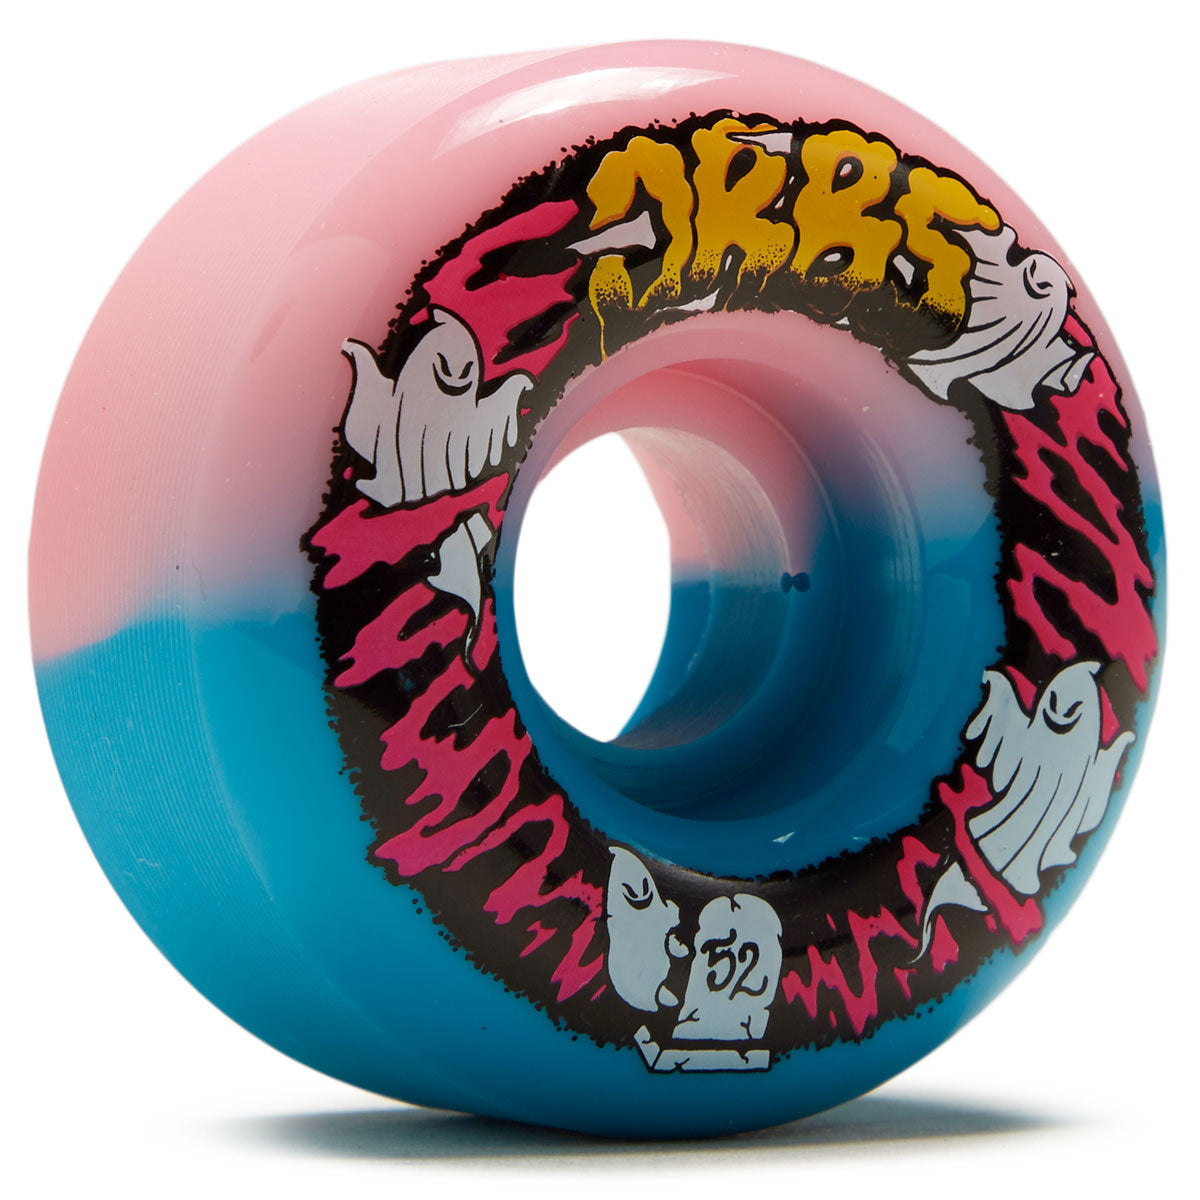 Welcome Orbs Apparitions '23 Round 99A Skateboard Wheels - Pink/Blue Split - 52mm image 1